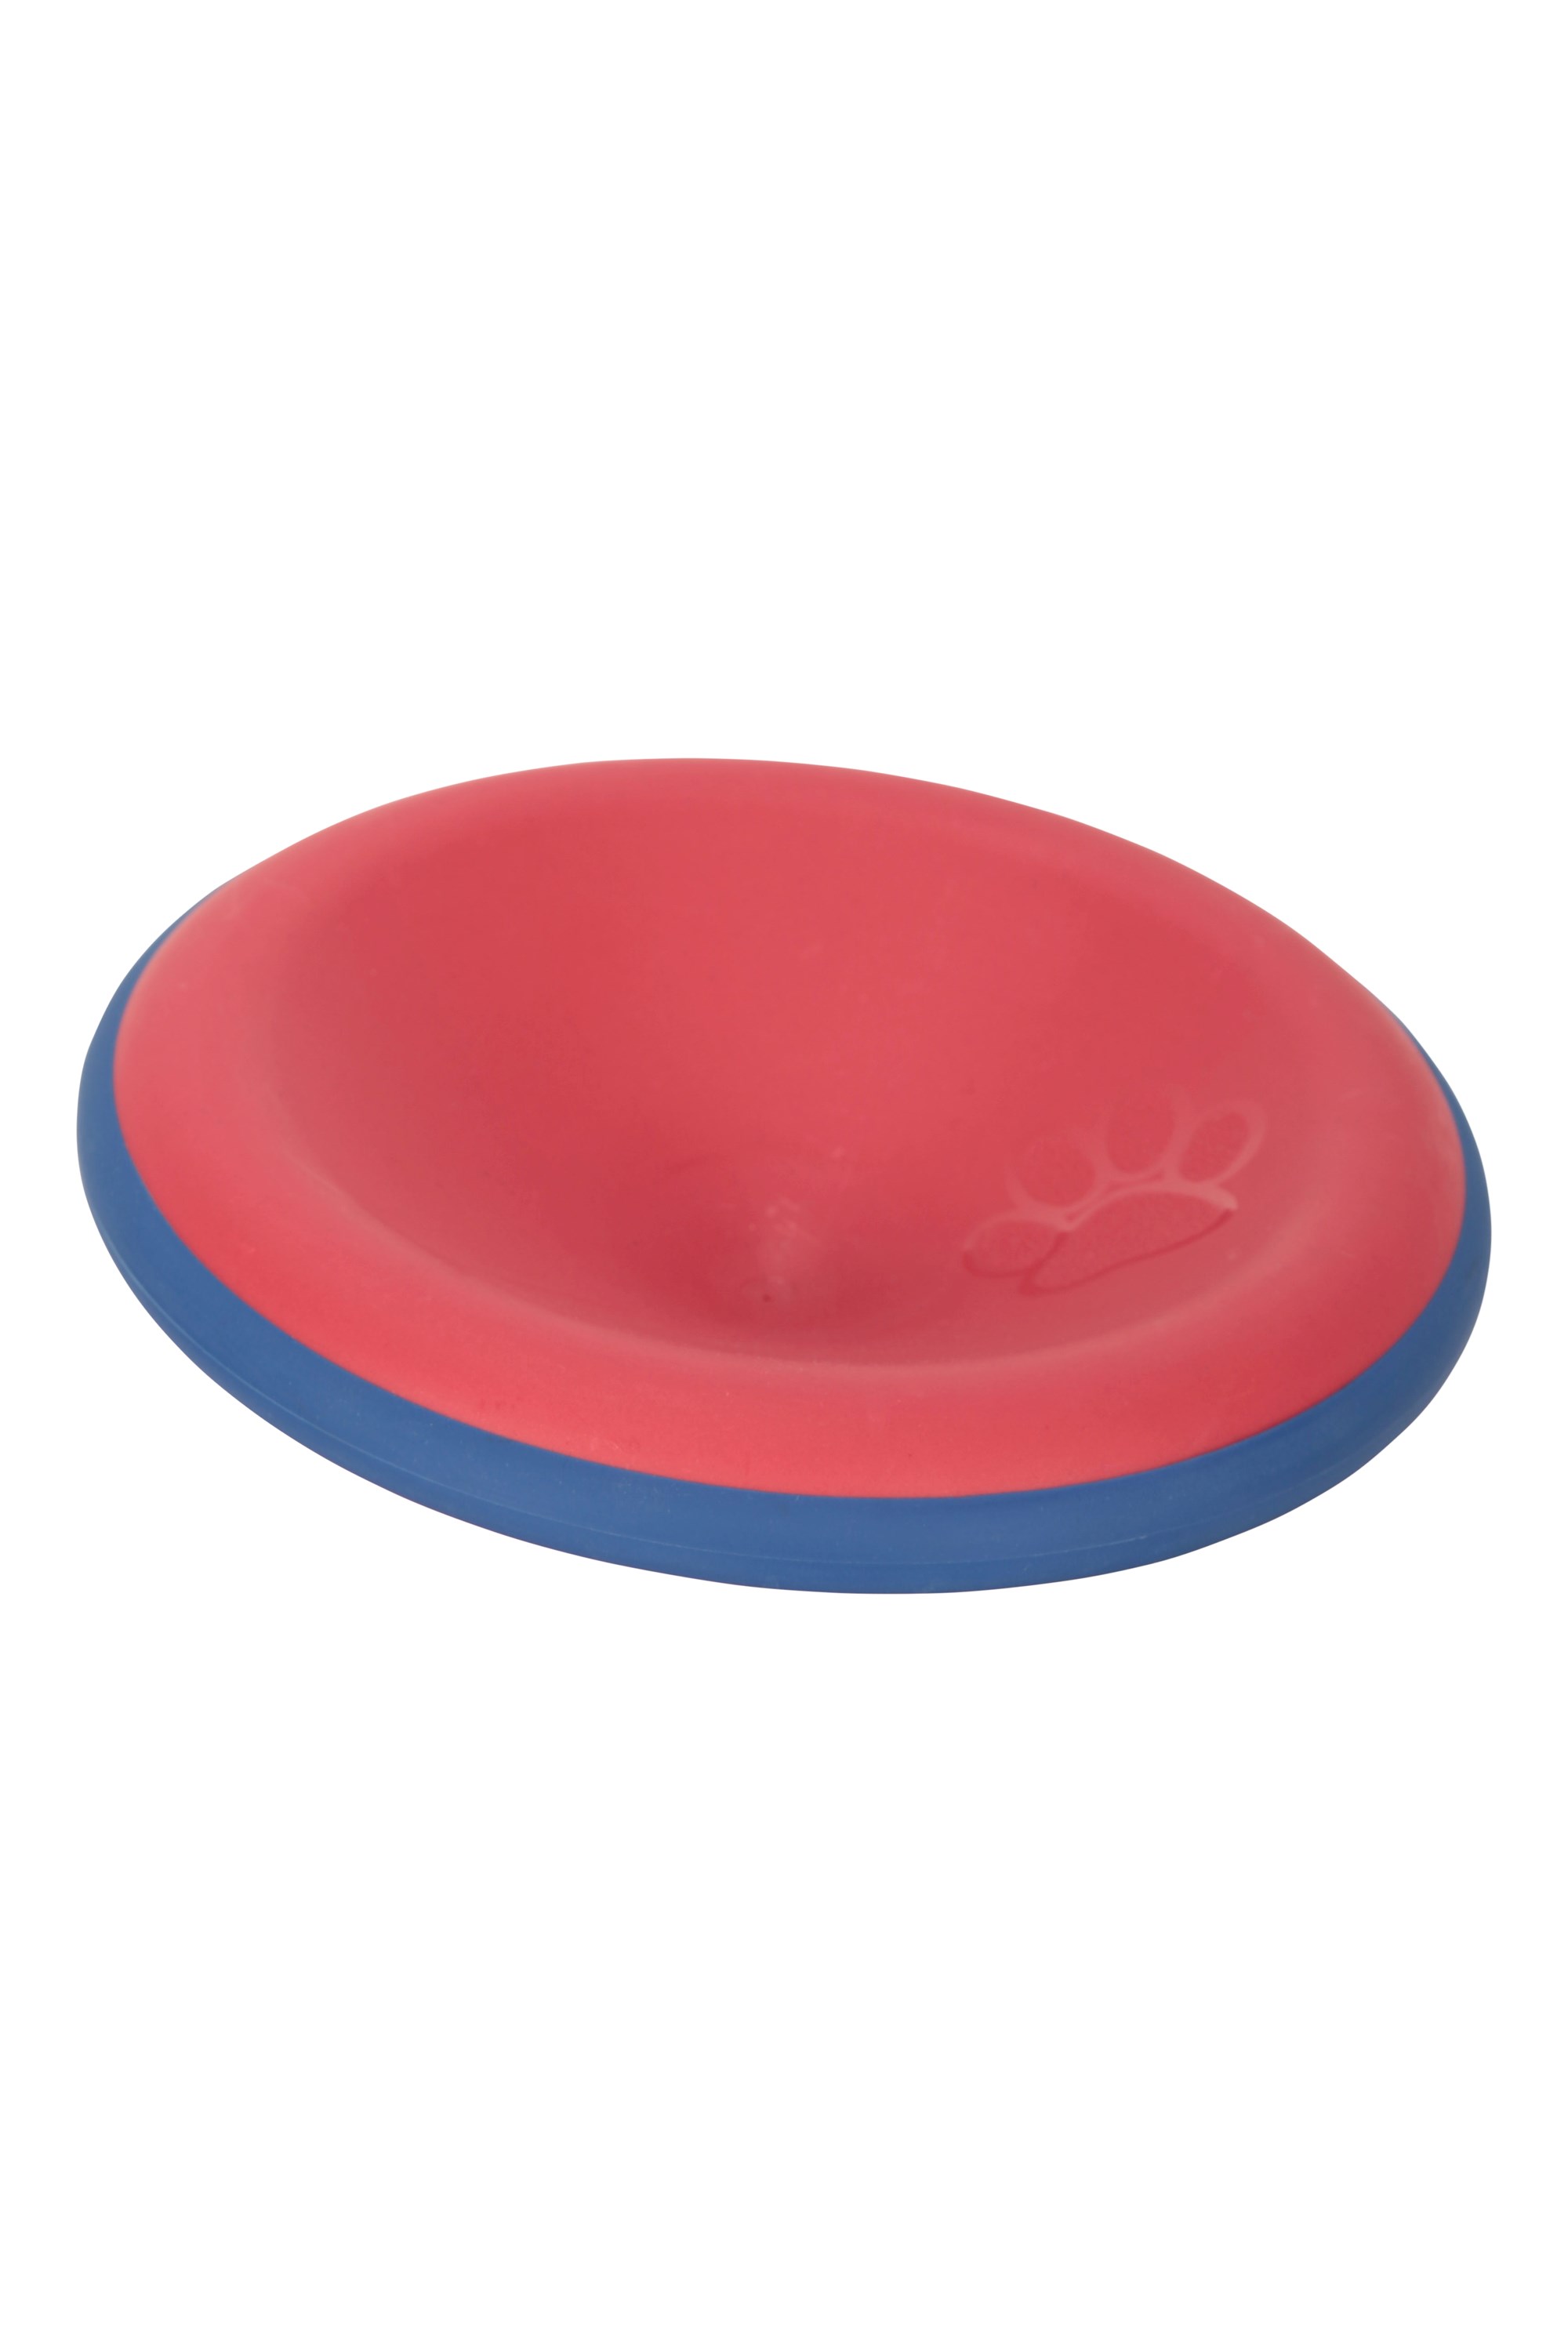 2-in-1 Dog Frisbee & Drinking Bowl - Red